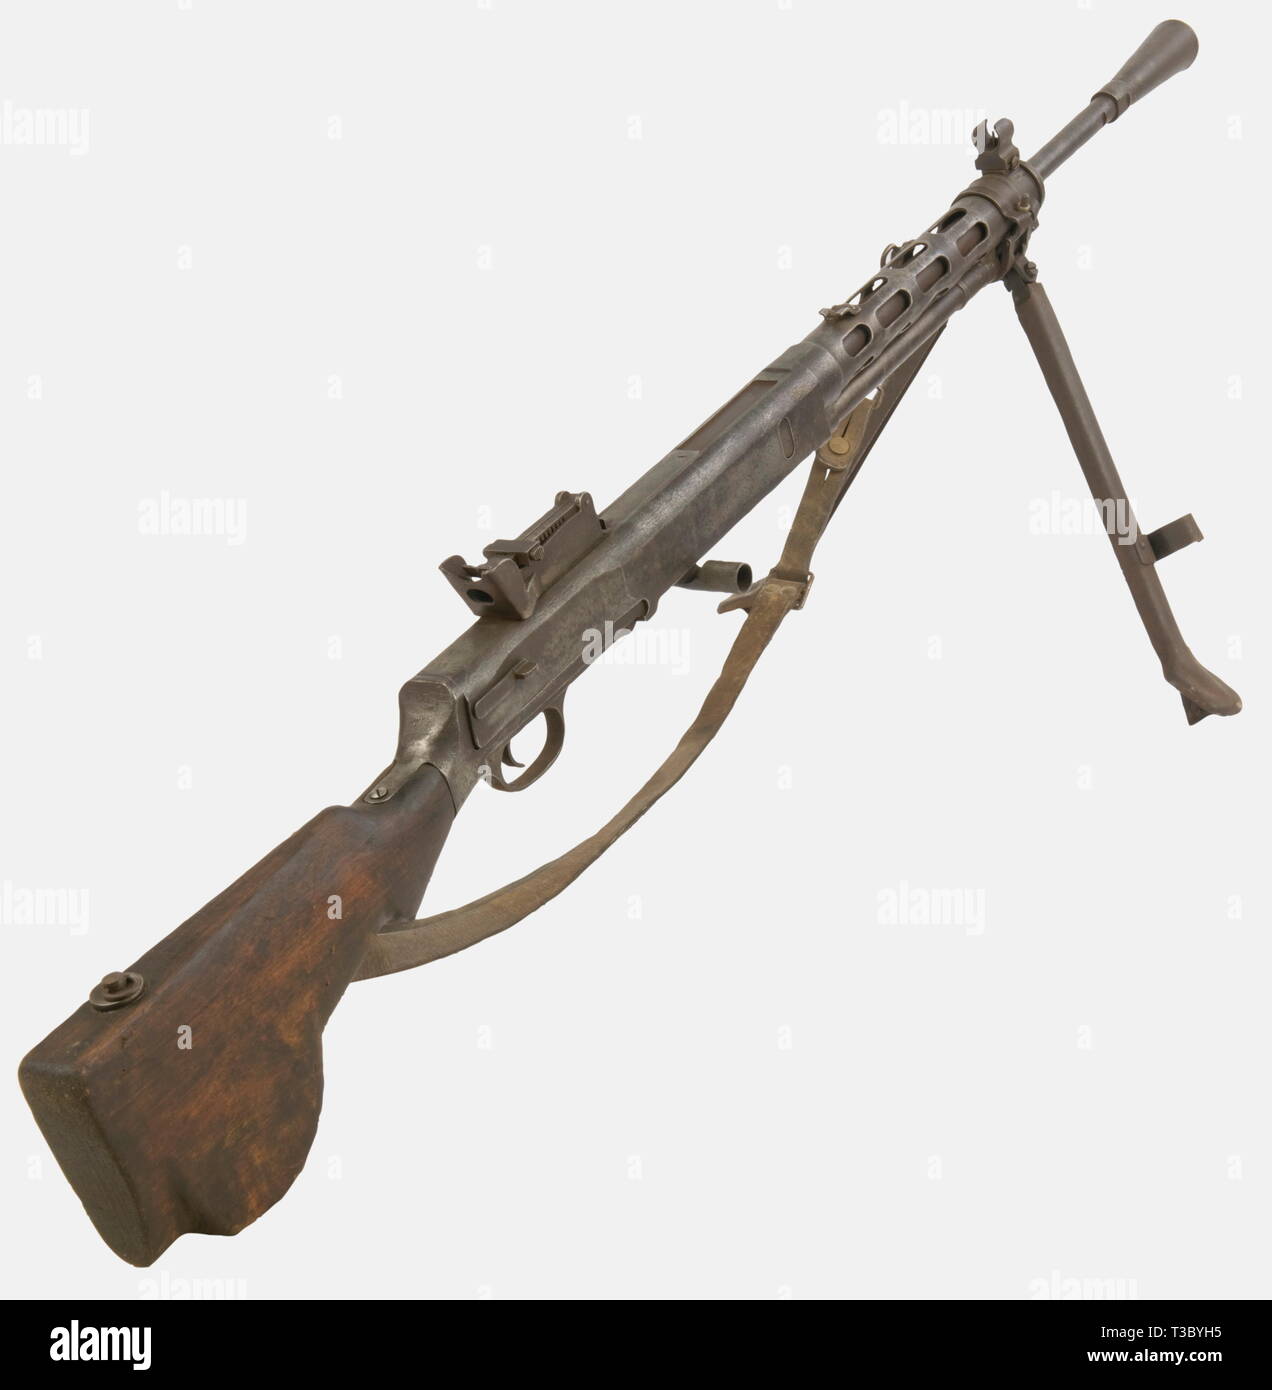 A Soviet light machine gun Degtyarev (DP 28), calibre 7,62 x 54R, made in 1943,. serial number TB135. Pitted, no more bluing, no magazine. With a leather sling of another model. historic, historical, 1930s, 20th century, gun, guns, firearm, fire arm, firearms, fire arms, weapons, arms, weapon, arm, fighting device, object, objects, stills, clipping, clippings, cut out, cut-out, cut-outs, military, militaria, piece of equipment, No-Exclusive-Use | Editorial-Use-Only Stock Photo